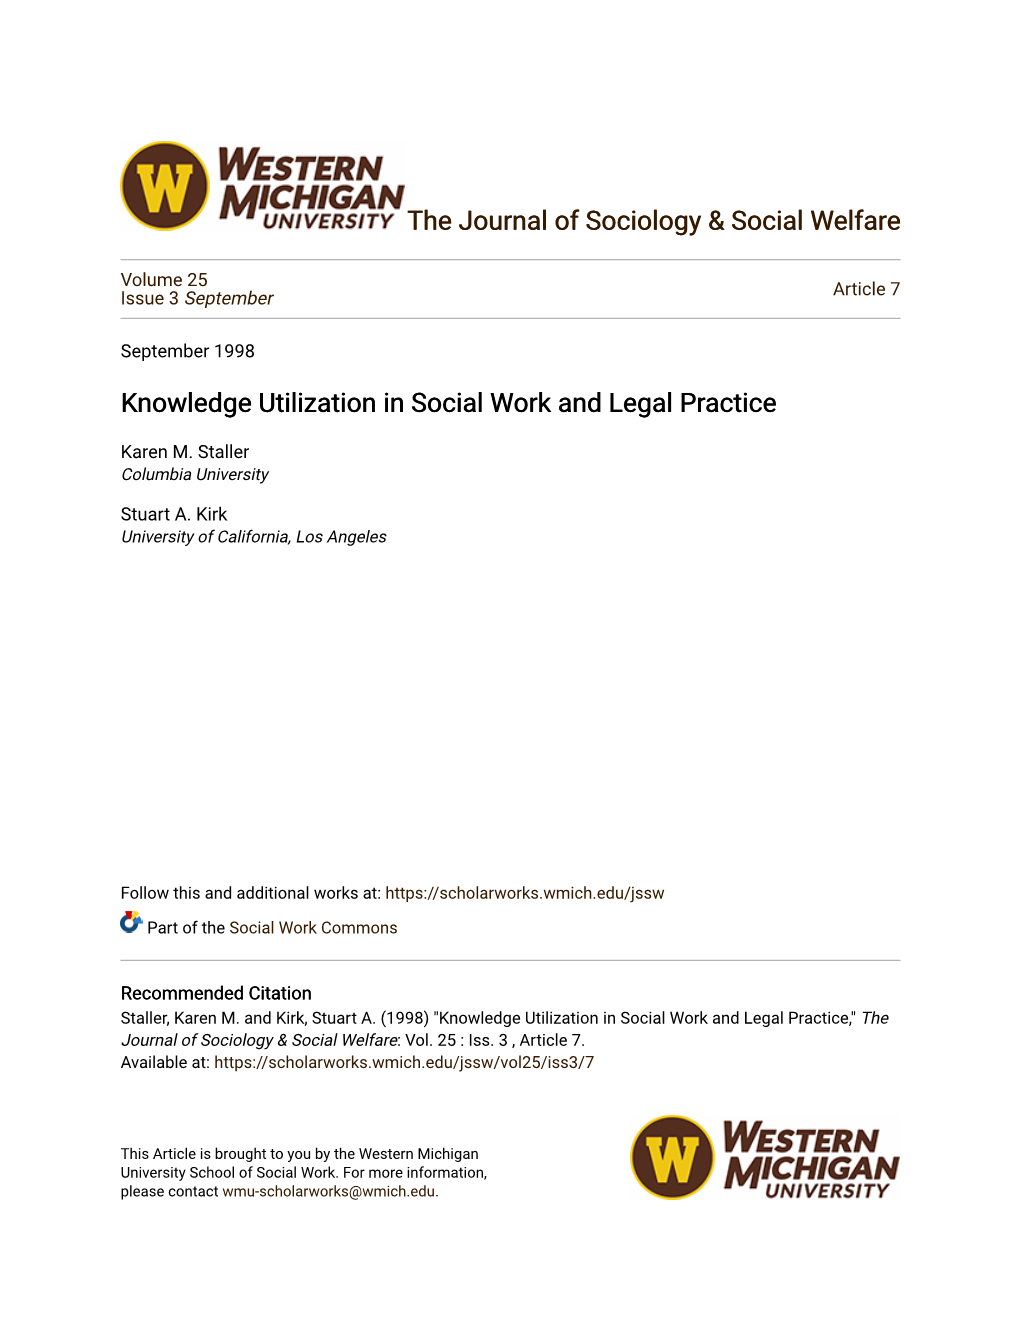 Knowledge Utilization in Social Work and Legal Practice